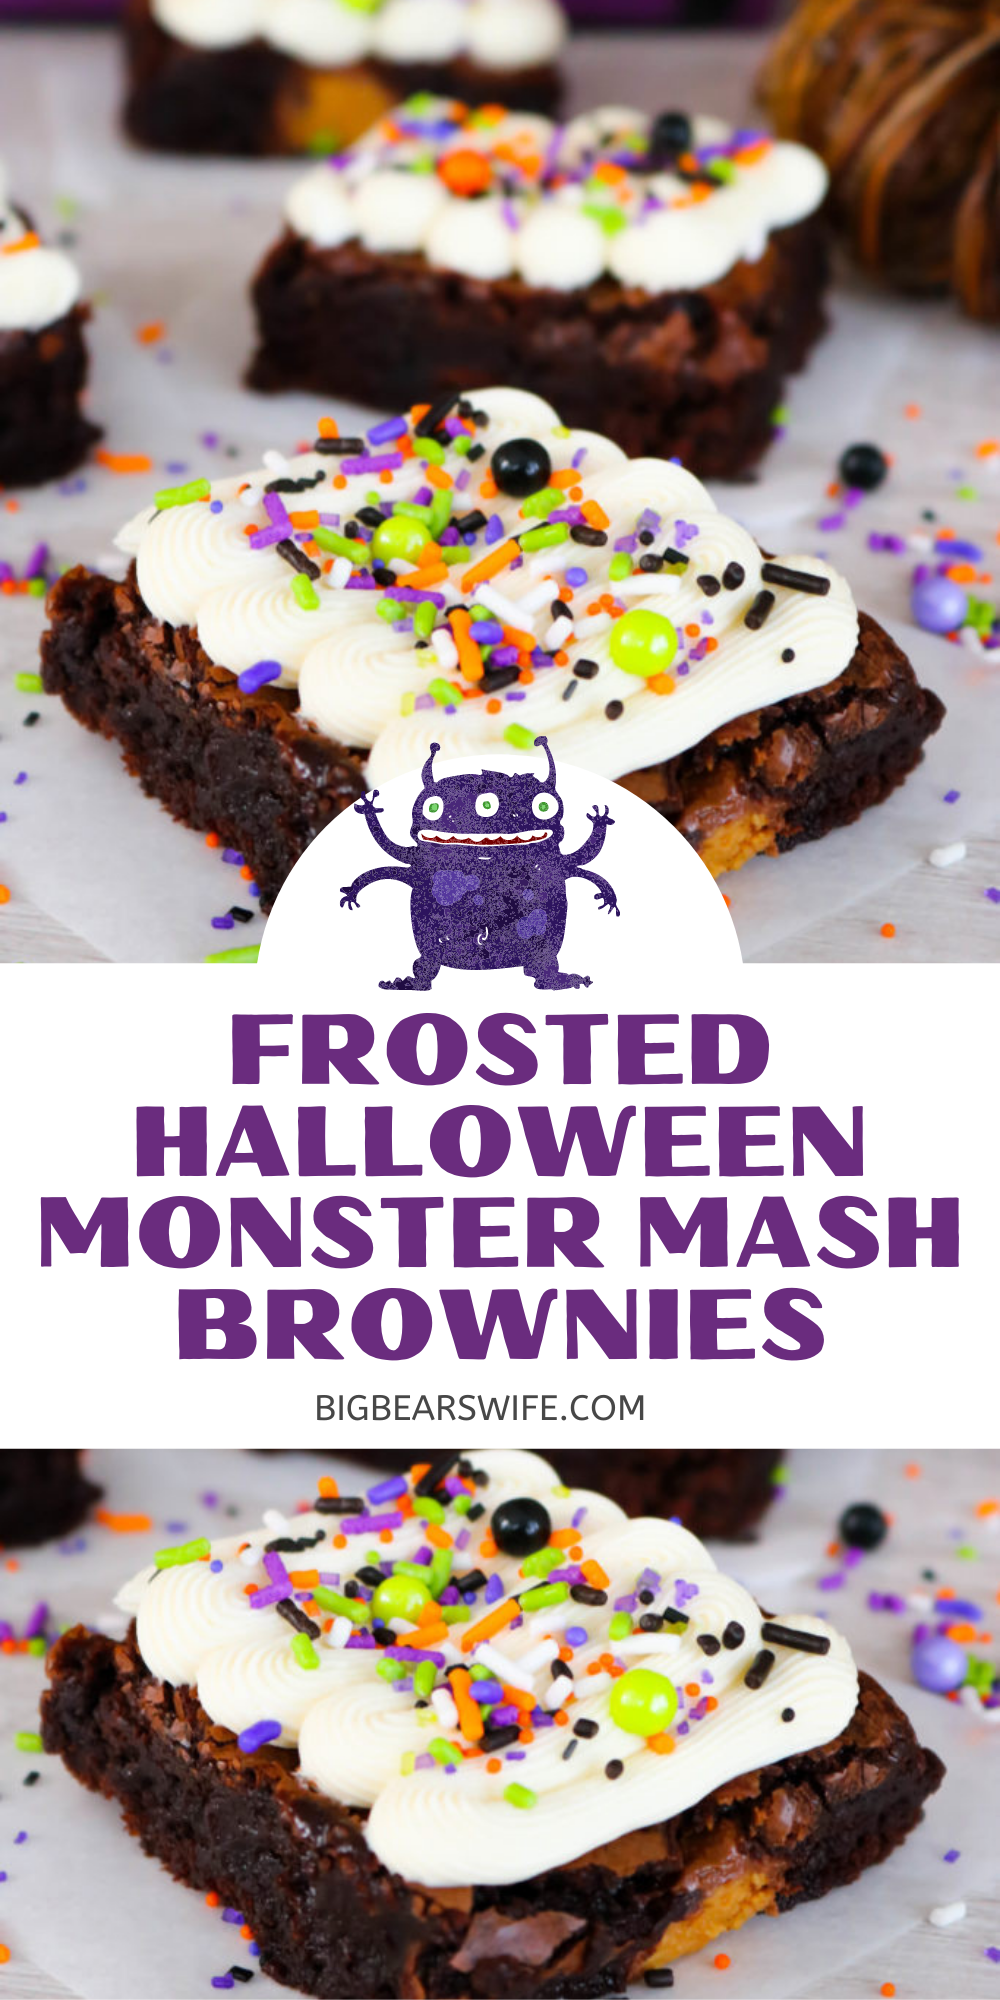 Peanut Butter stuffed brownies are celebrating Halloween with Monster Mash makeover! These Frosted Halloween Monster Mash Brownies have the perfect Halloween sprinkles on top of the easy homemade frosting and creepy gummy eyeballs.  via @bigbearswife